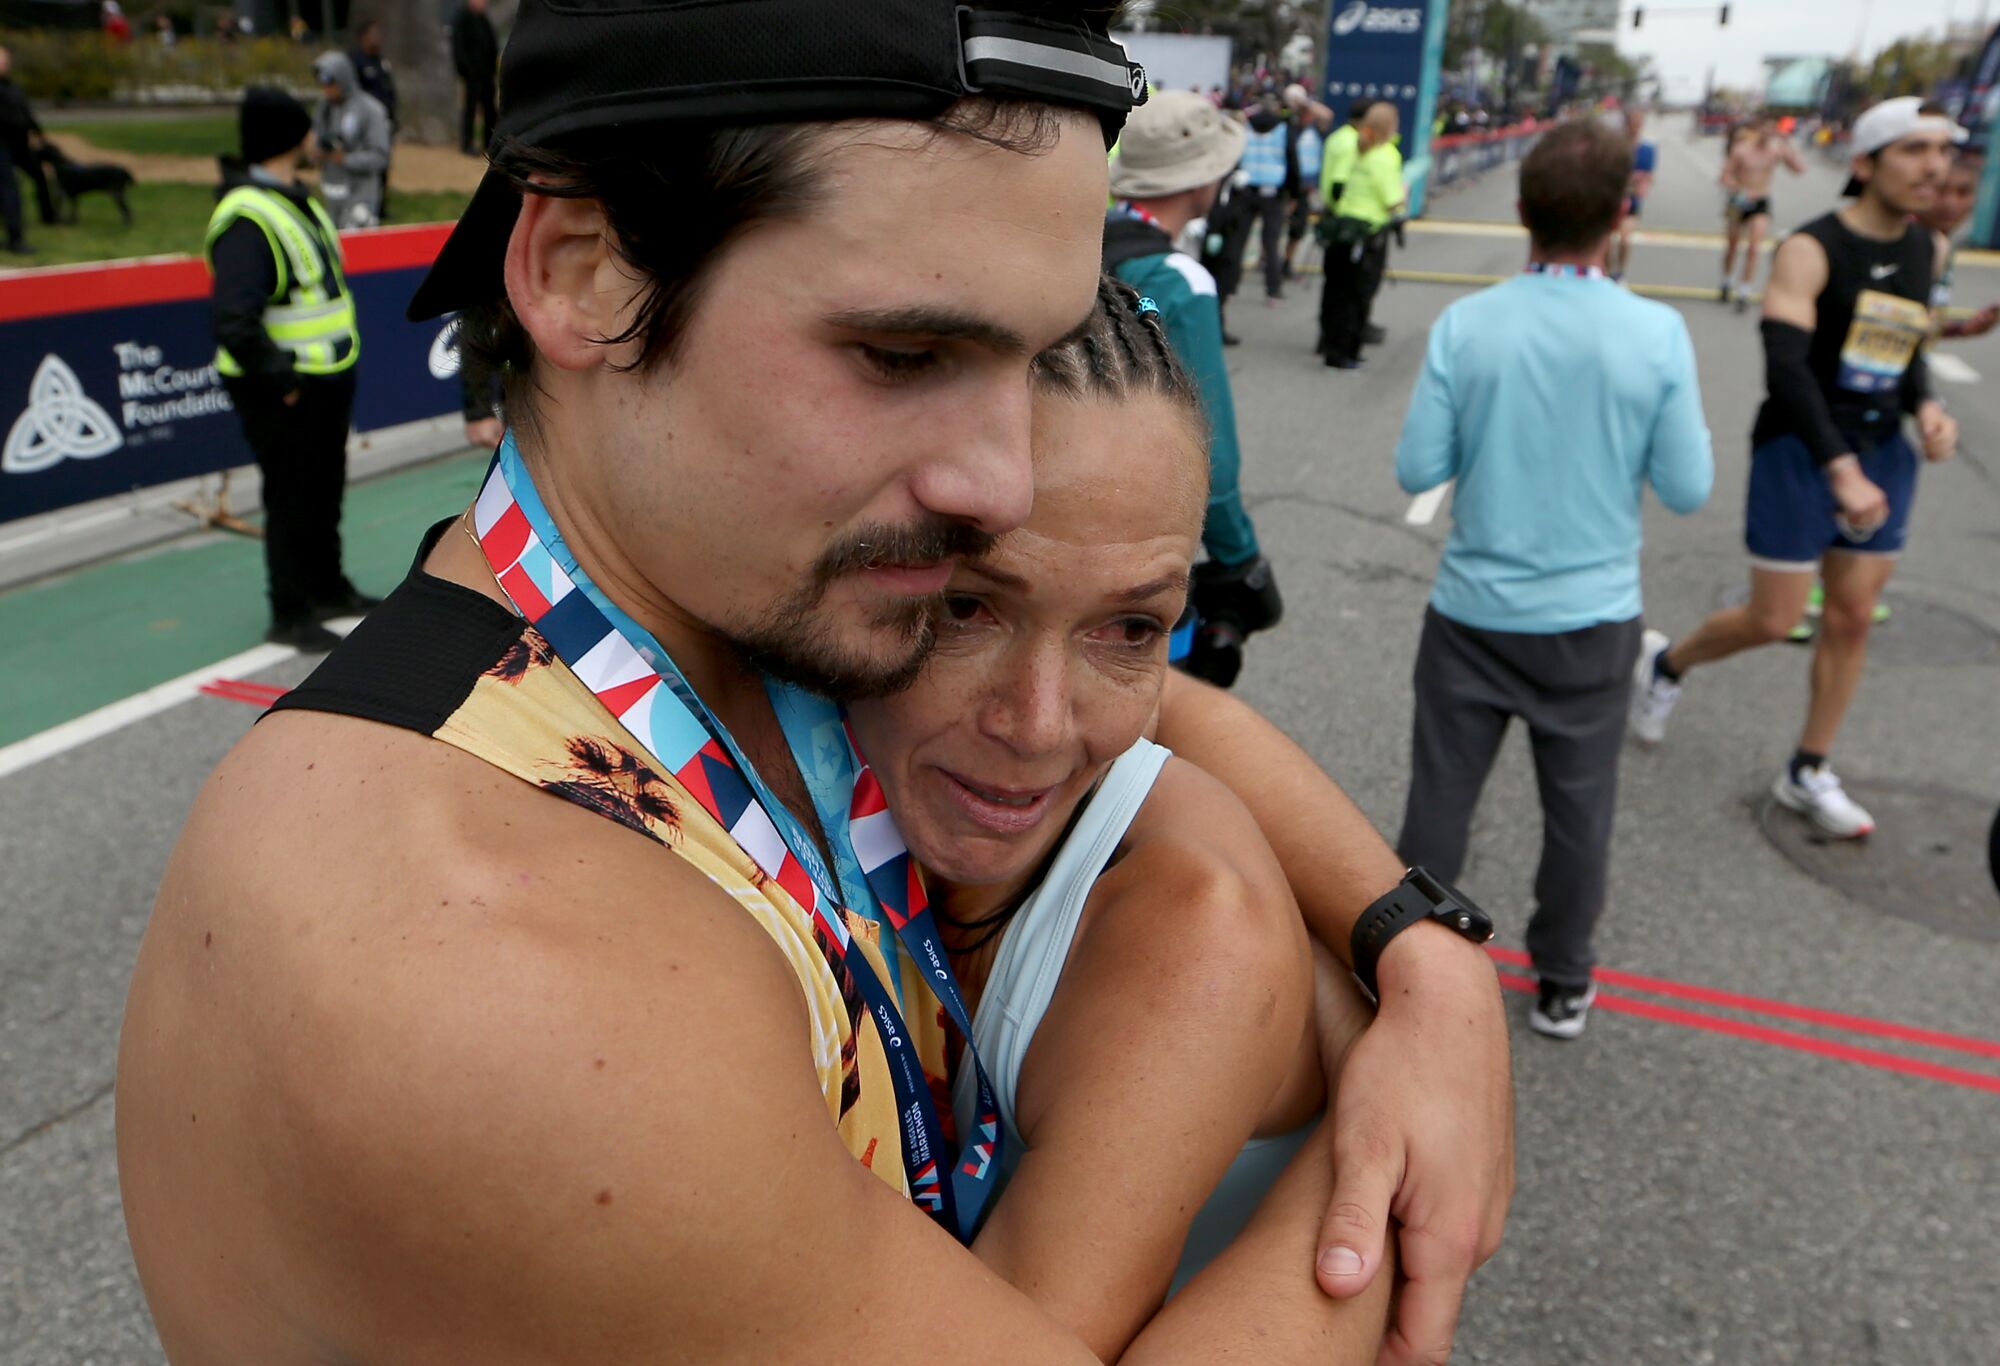 Two runners embrace on the street after finishing the Los Angeles Marathon.